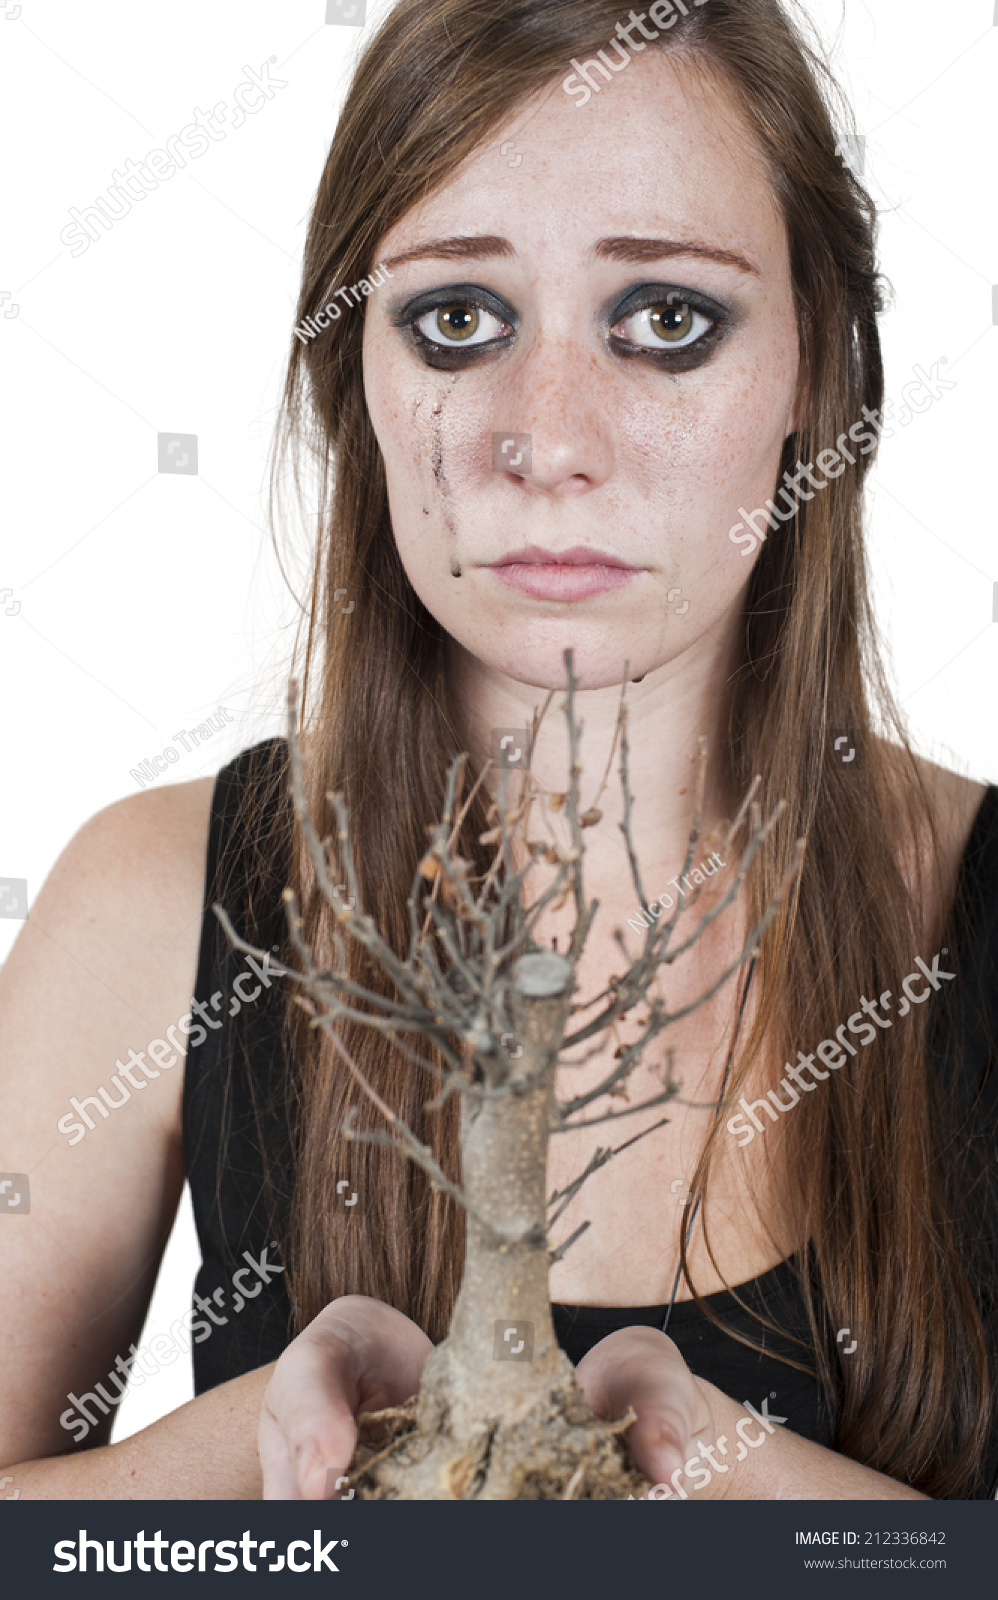 Crying woman depicting concept of dying nature holding a dead <b>bonsai tree</b>. - stock-photo-crying-woman-depicting-concept-of-dying-nature-holding-a-dead-bonsai-tree-isolated-on-white-212336842